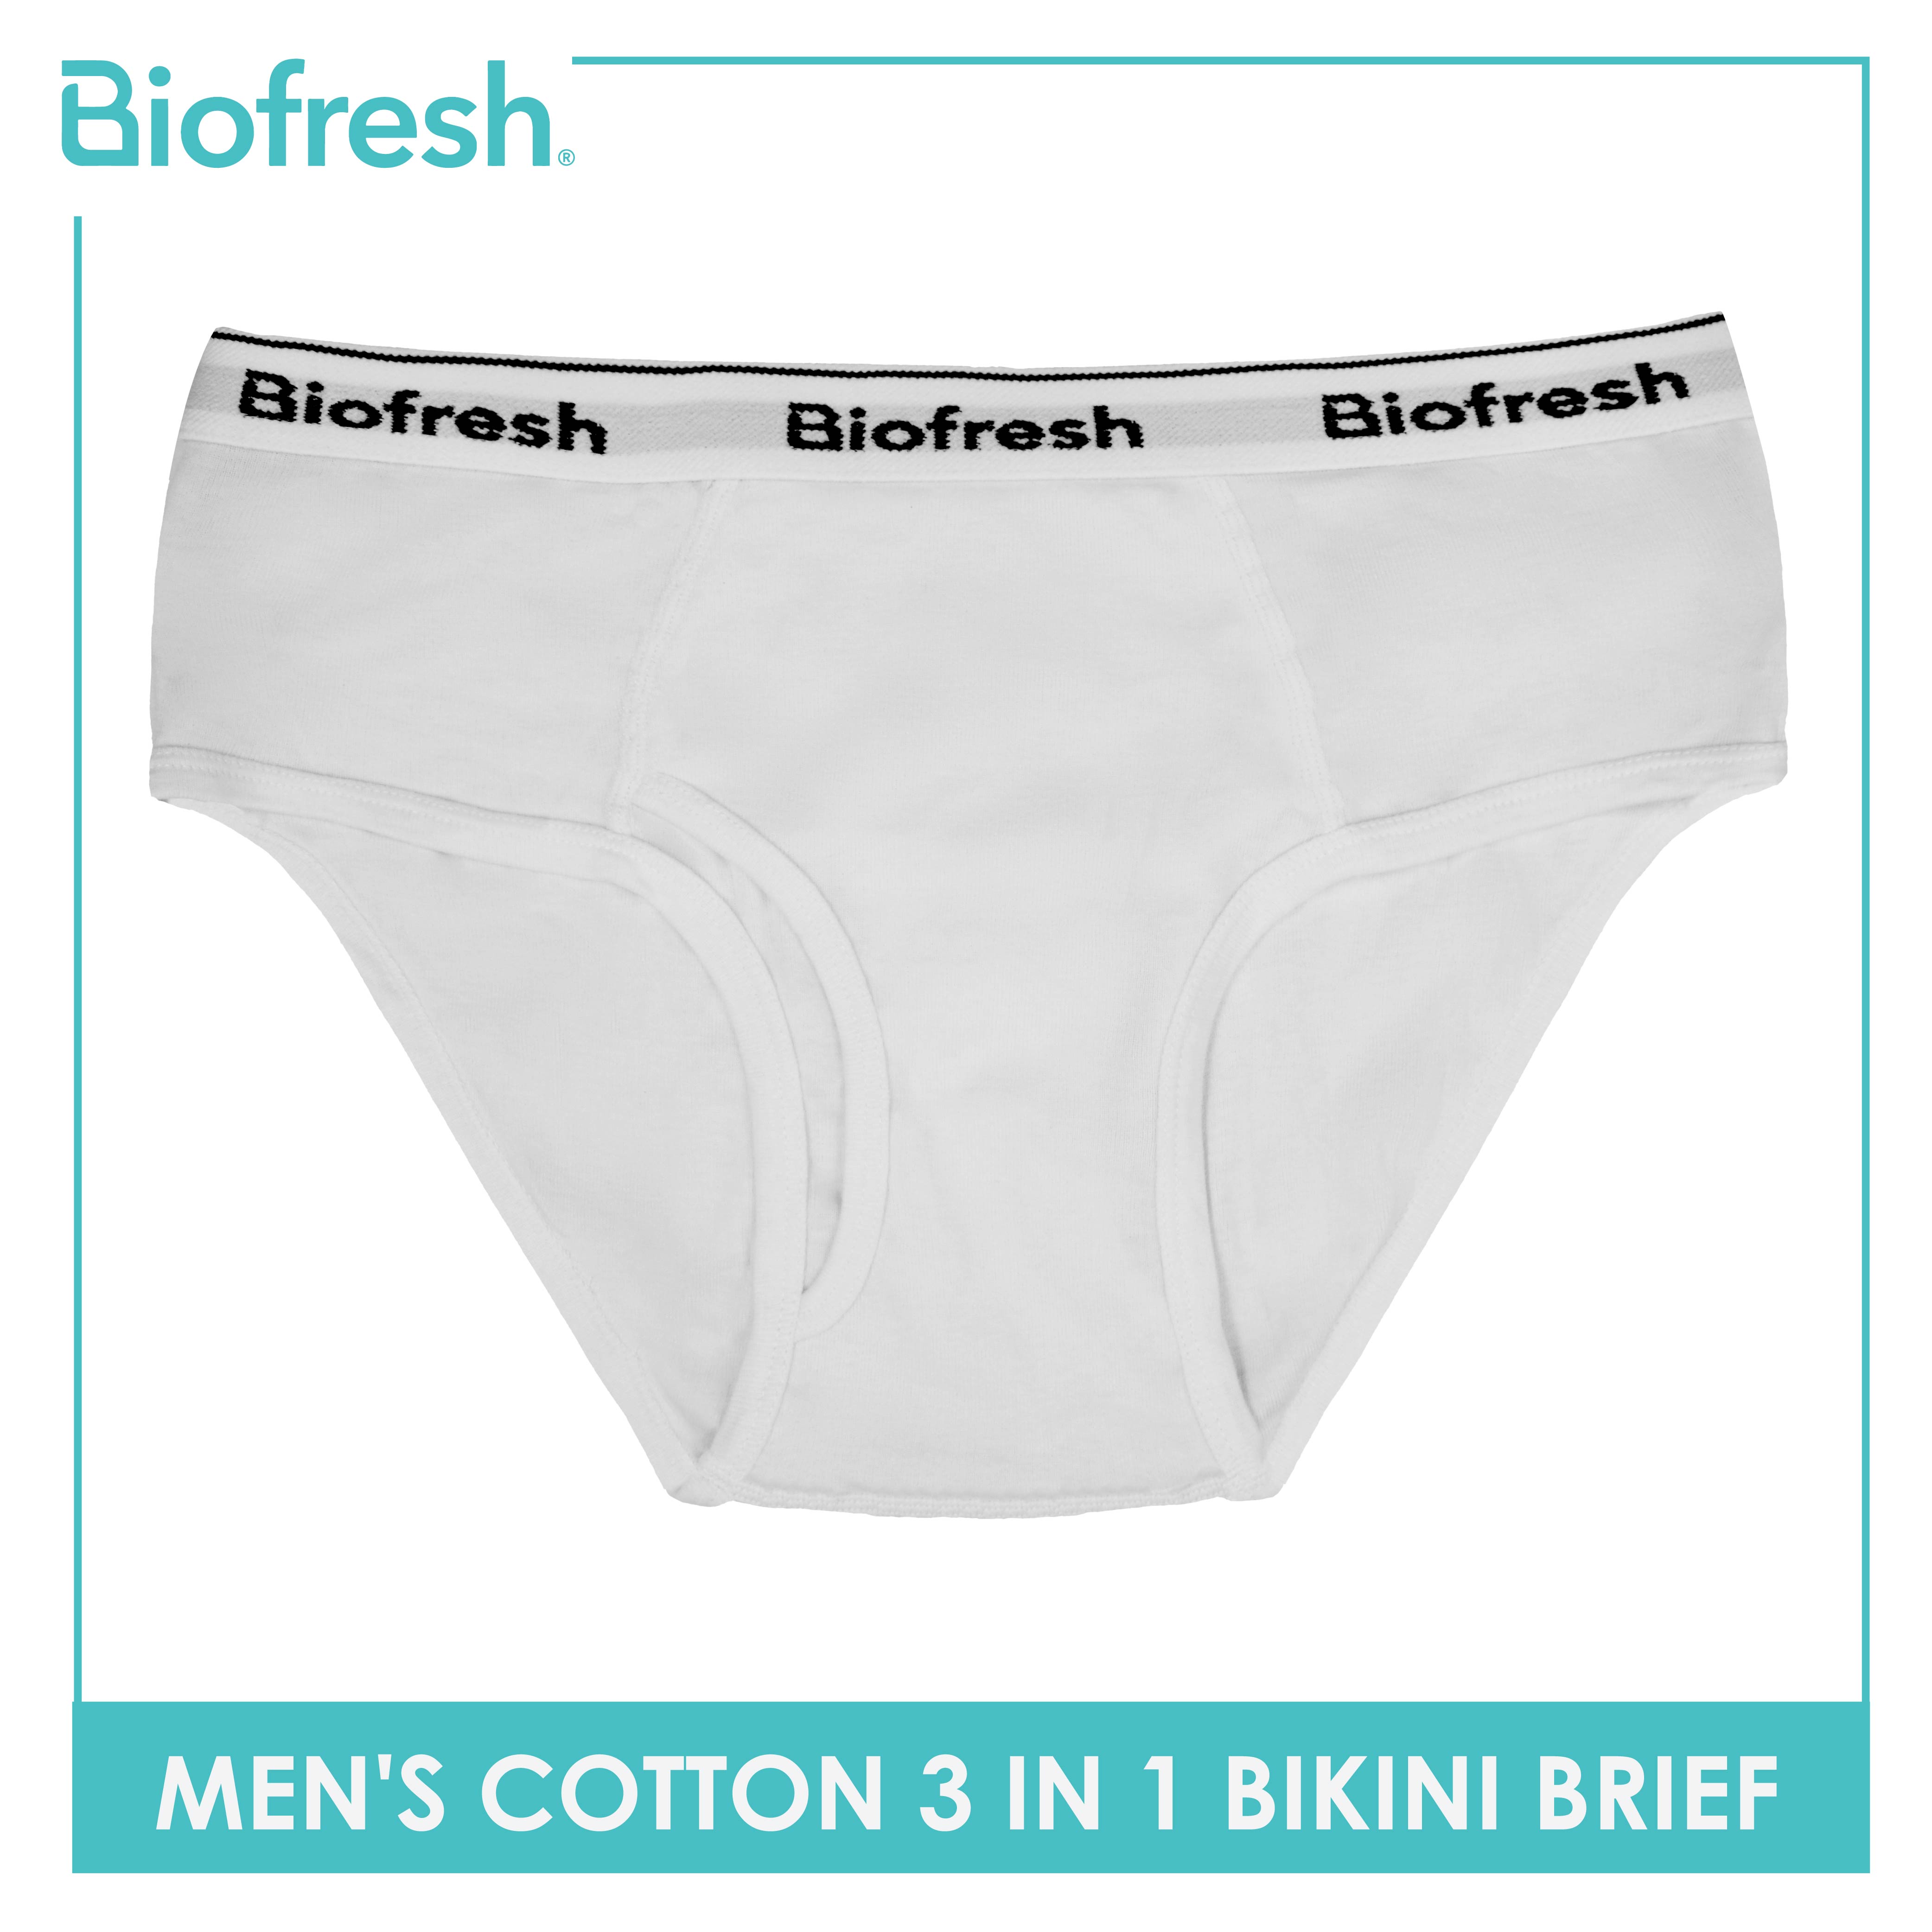 Biofresh PH - Life's too short to wear mediocre underwear. #Biofresh  undergarments has antimicrobial finish that keeps you fresh and odor free  all day! #KeepEmFresh